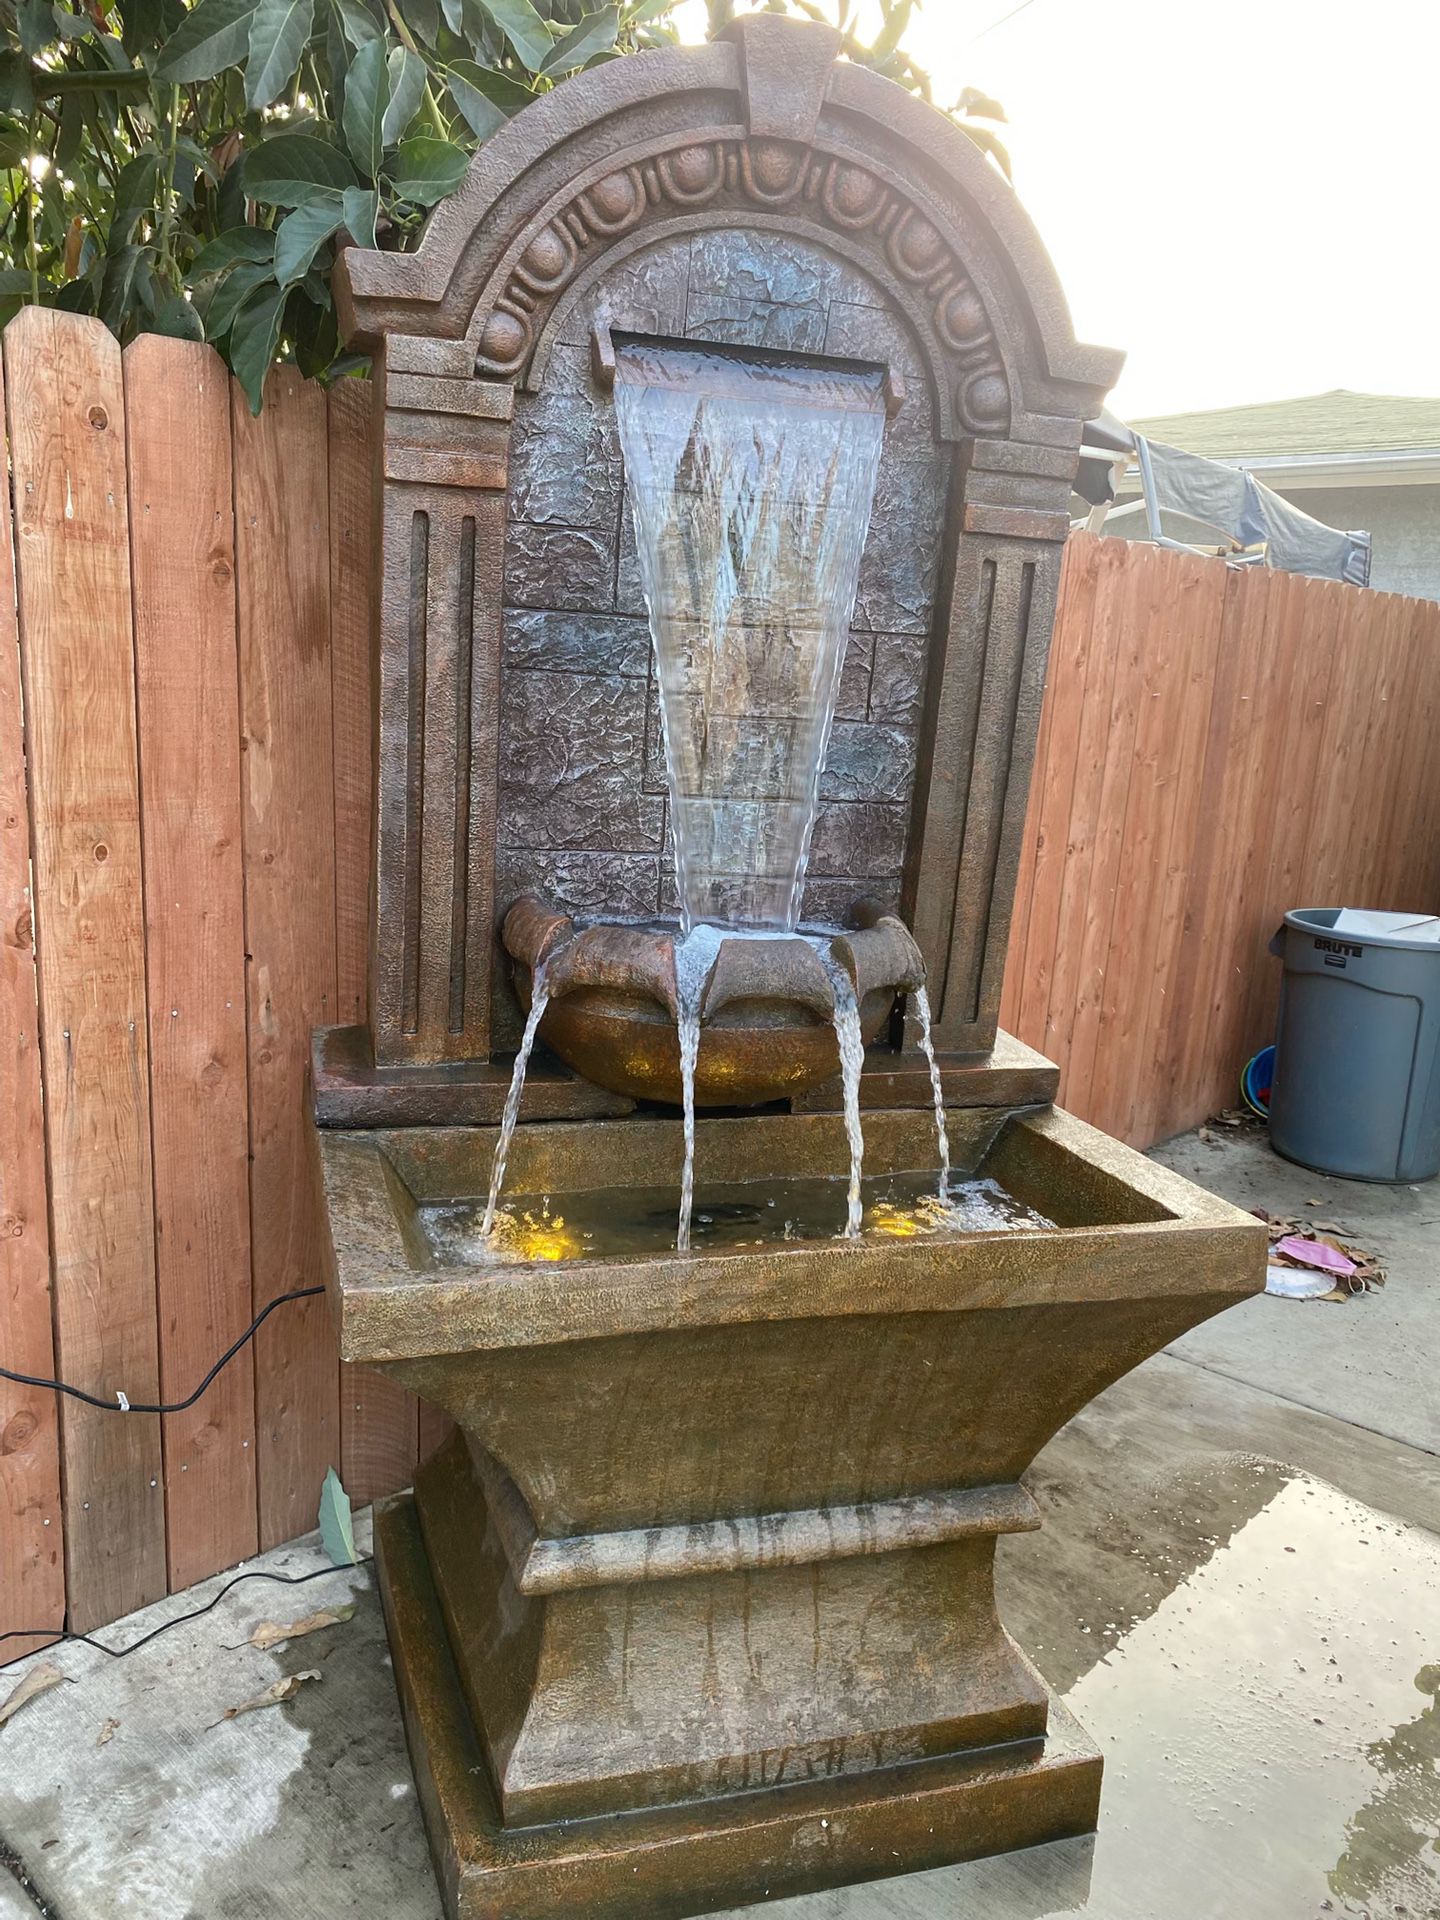 Large Fountain NEED IT GONE ASAP